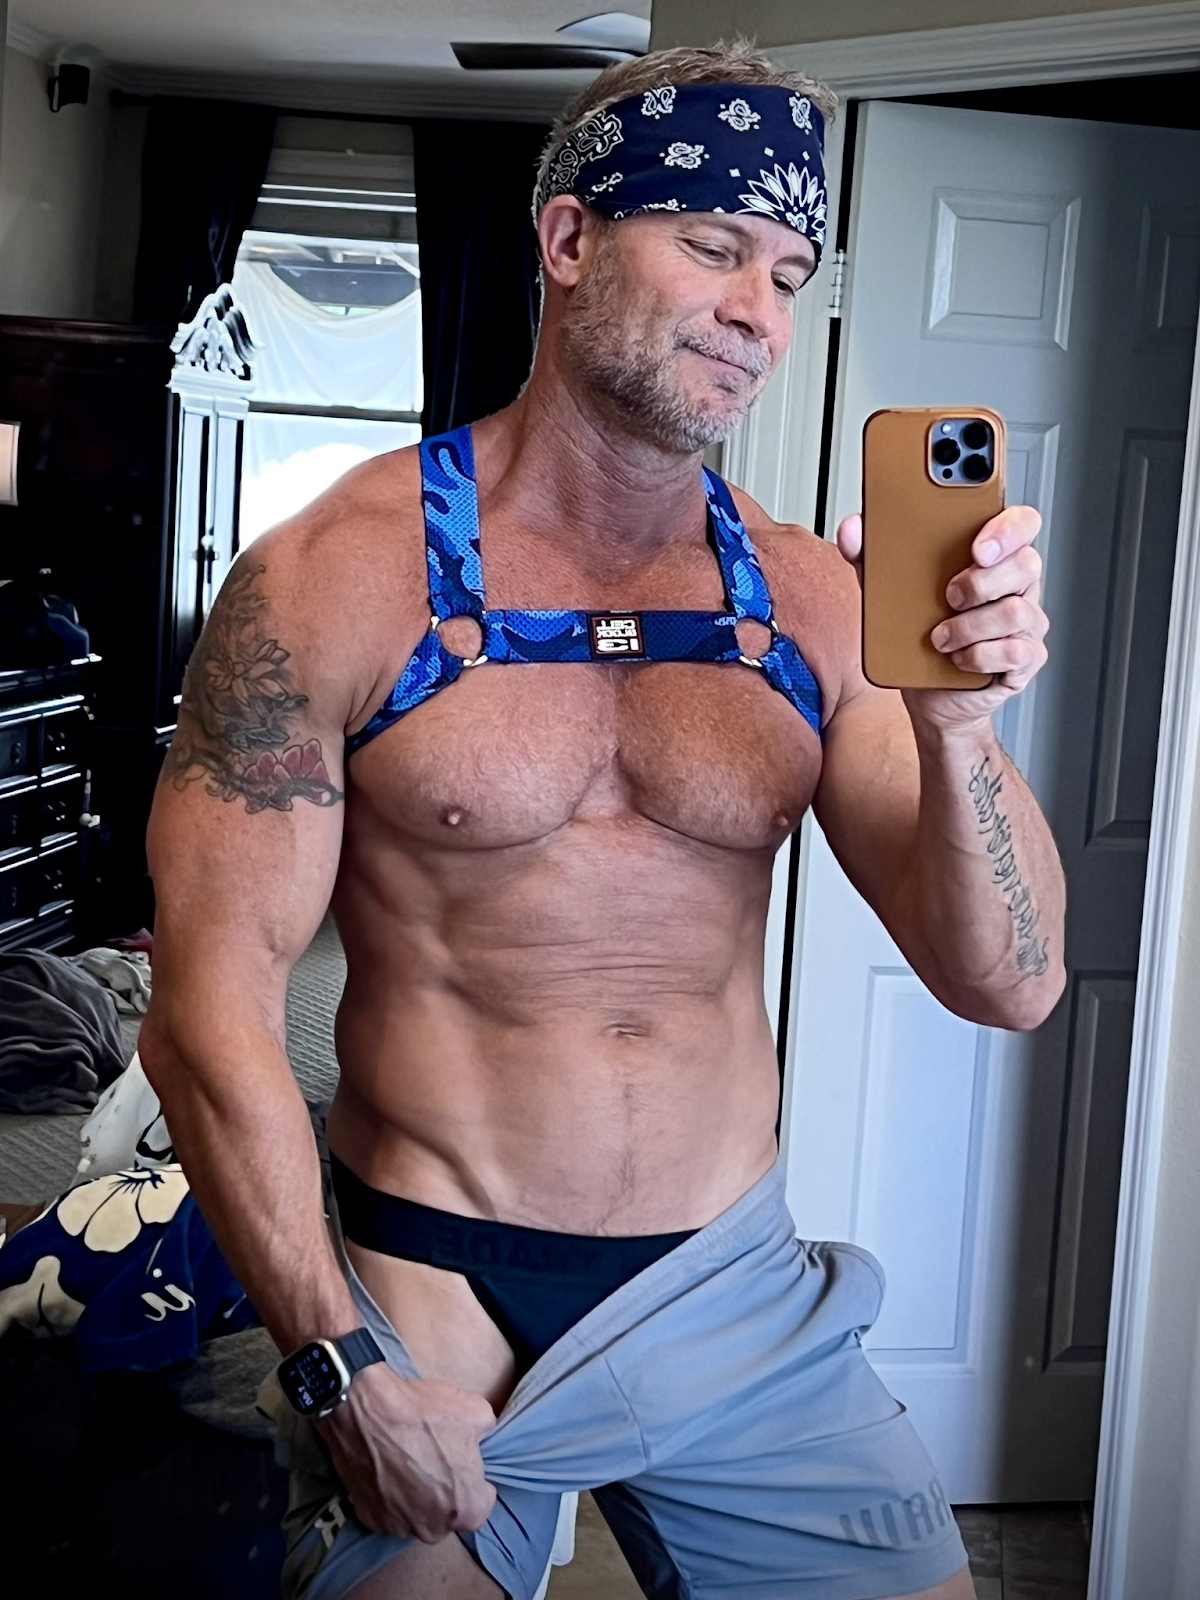 Greg Dixxon wearing a blue camo harness and black jockstrap while pulling down his grey sweatpants for an iPhone mirror selfie